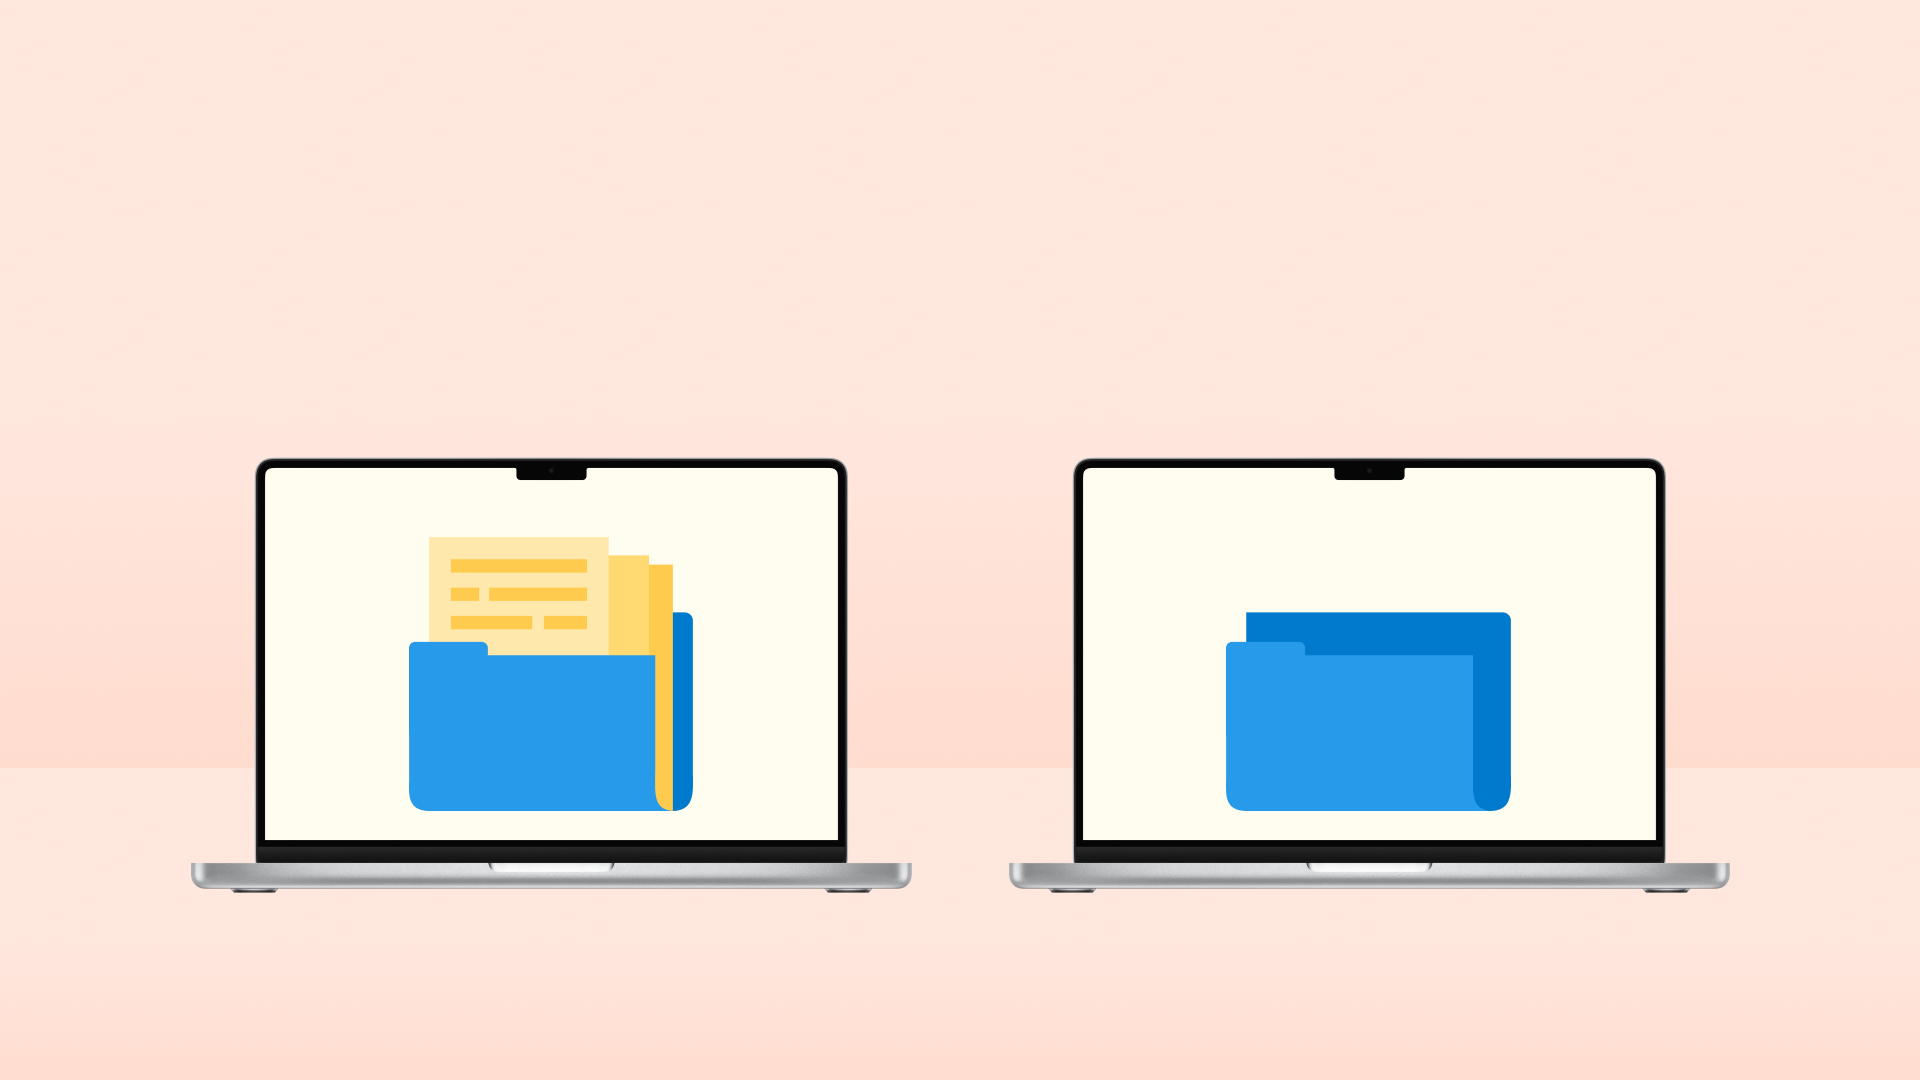 Illustration of two open laptops side by side. Left laptop shows a folder with files, right laptop shows a folder with no files.